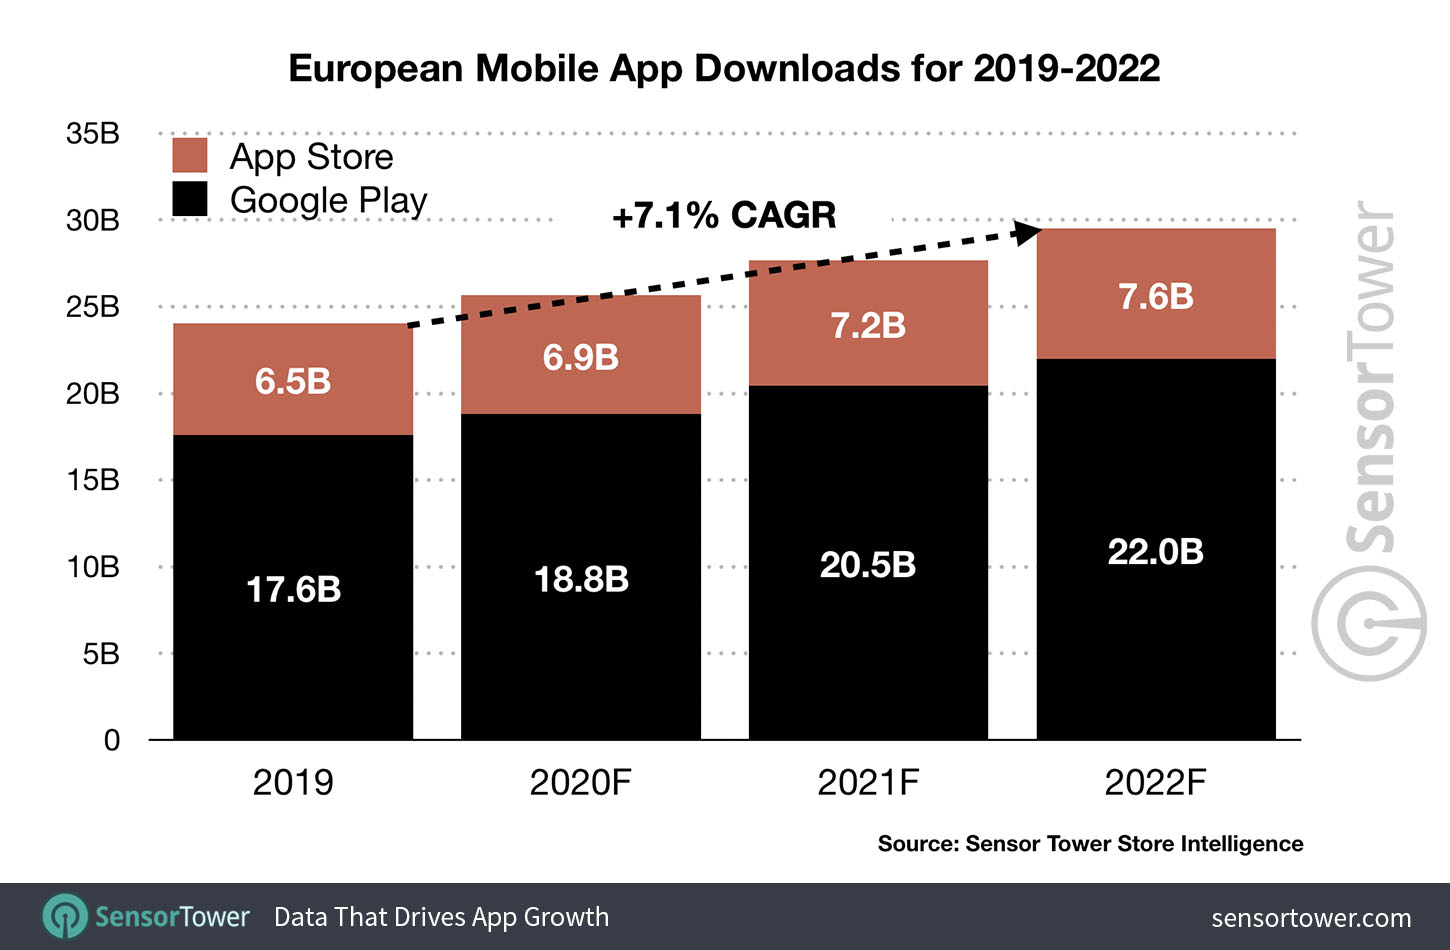 Top European countries by mobile app downloads 2019-2022